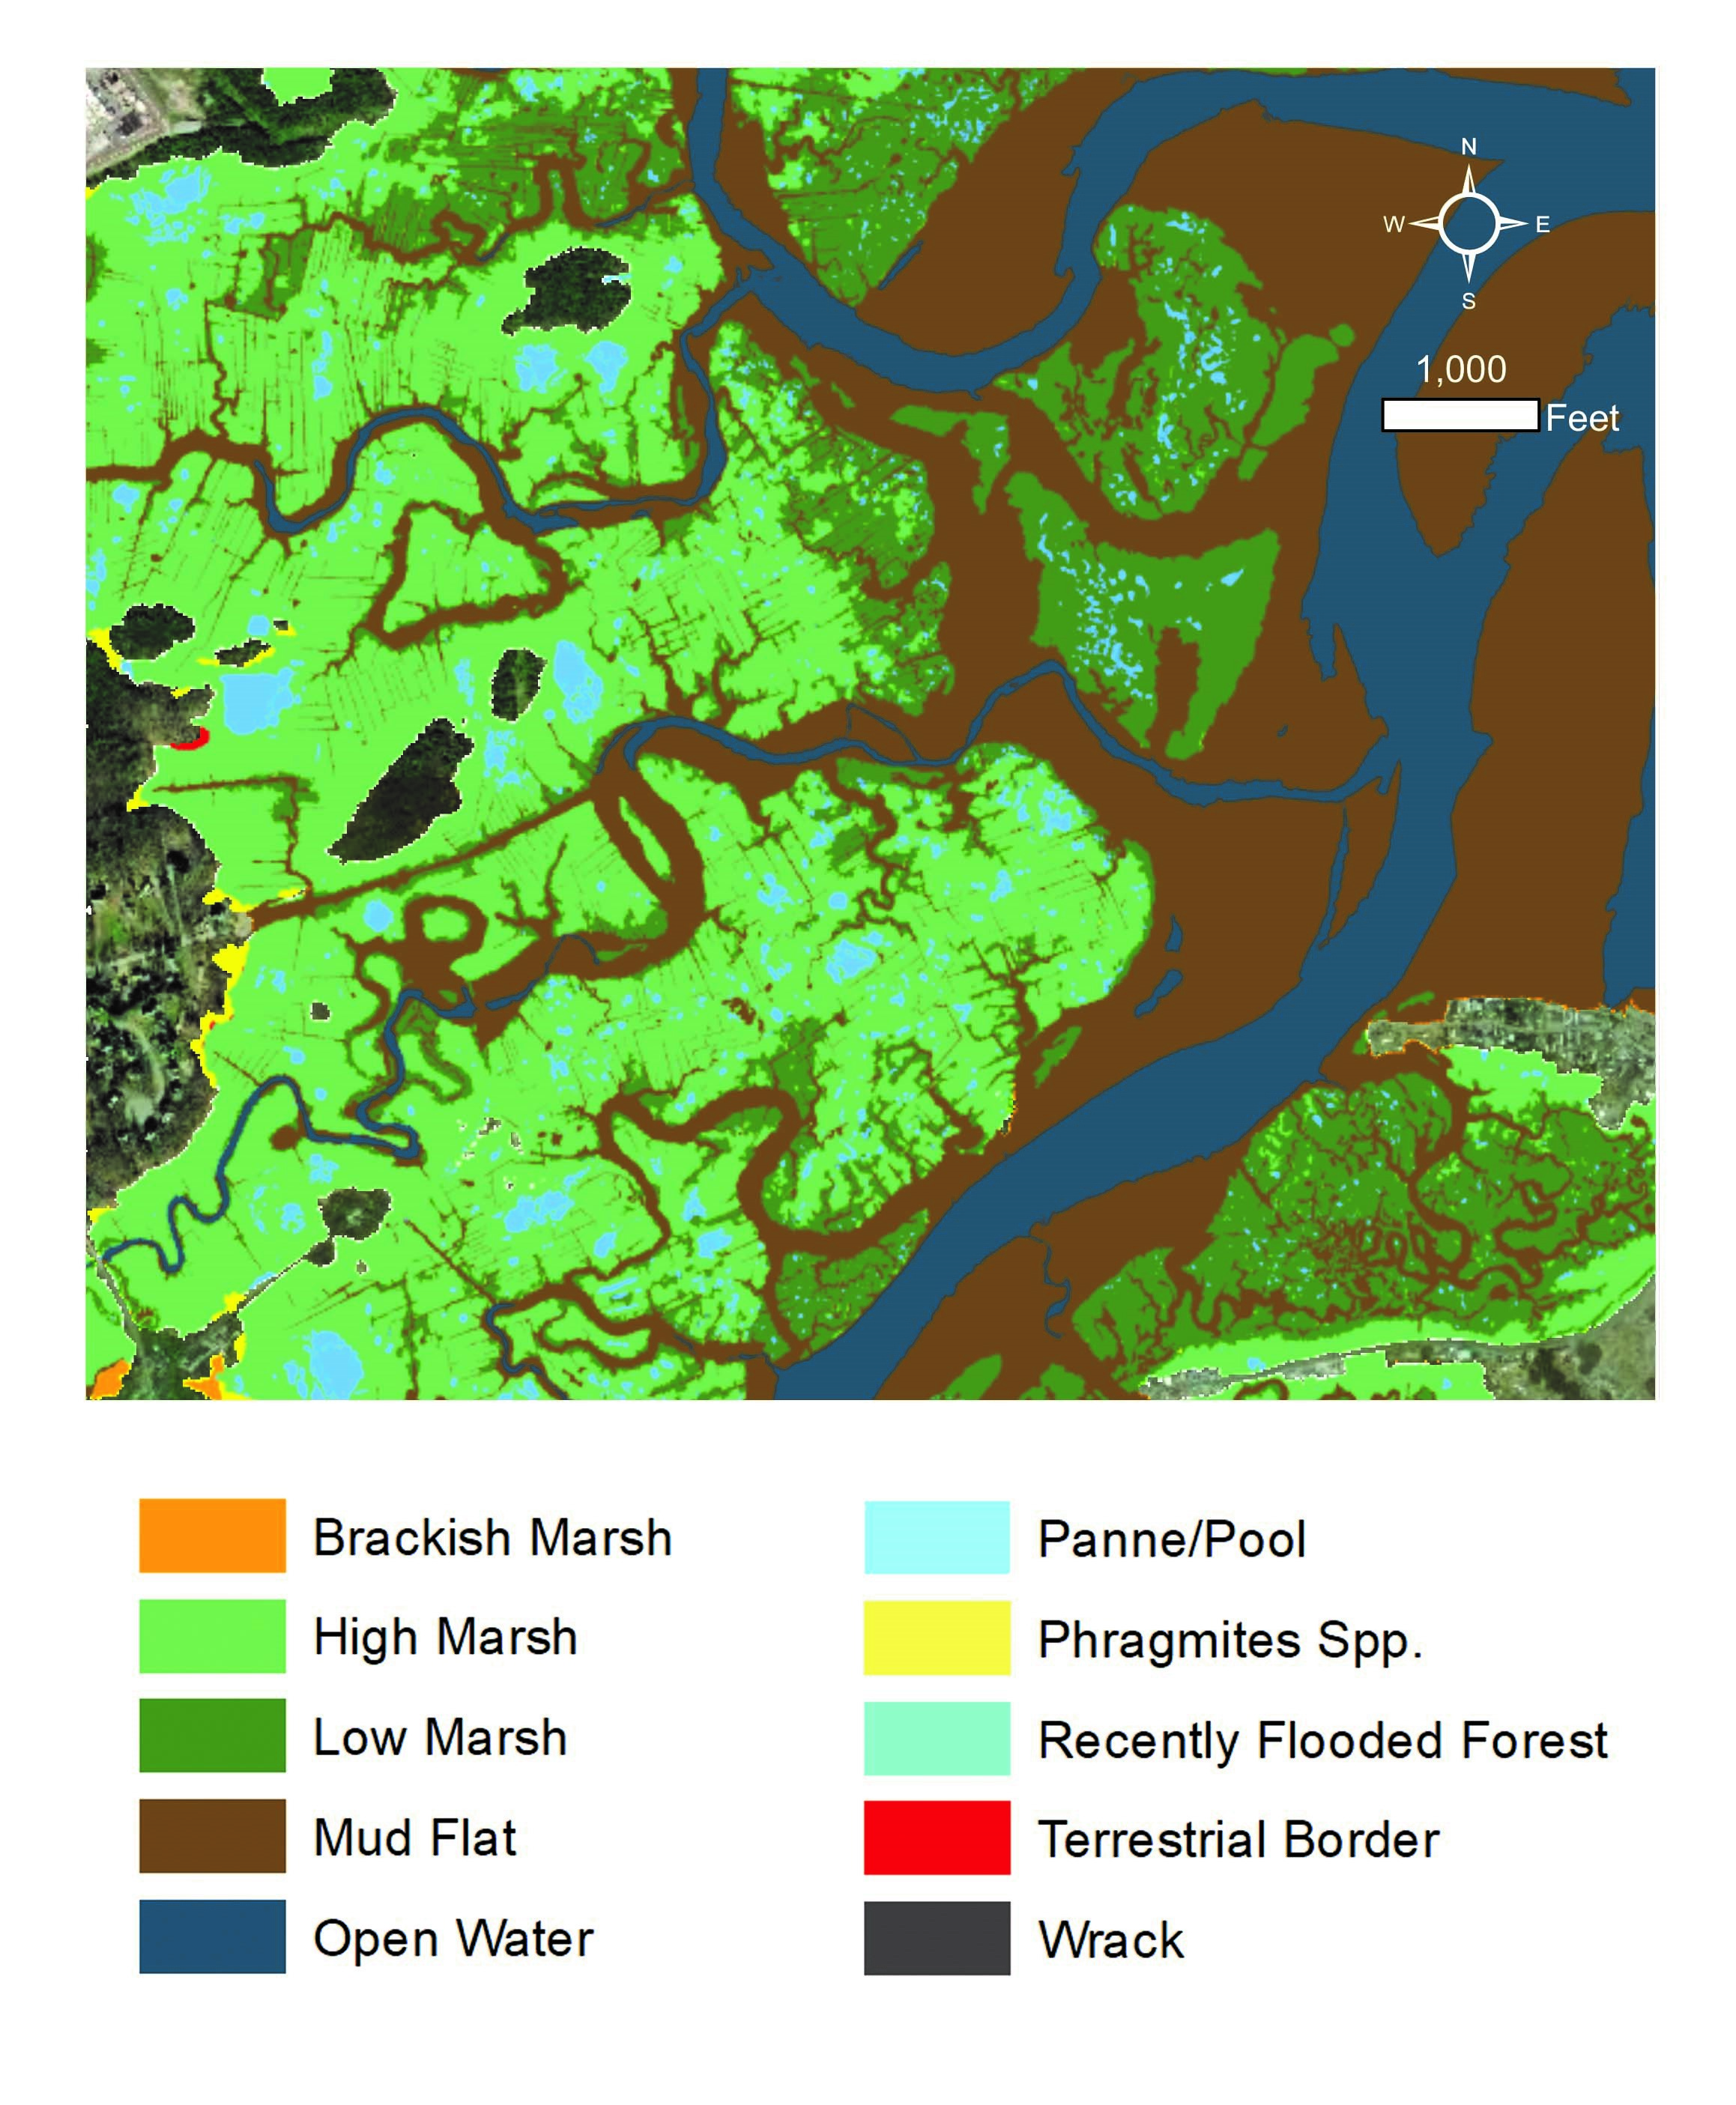 High-resolution tidal wetland data showing vulnerability to sea level rise